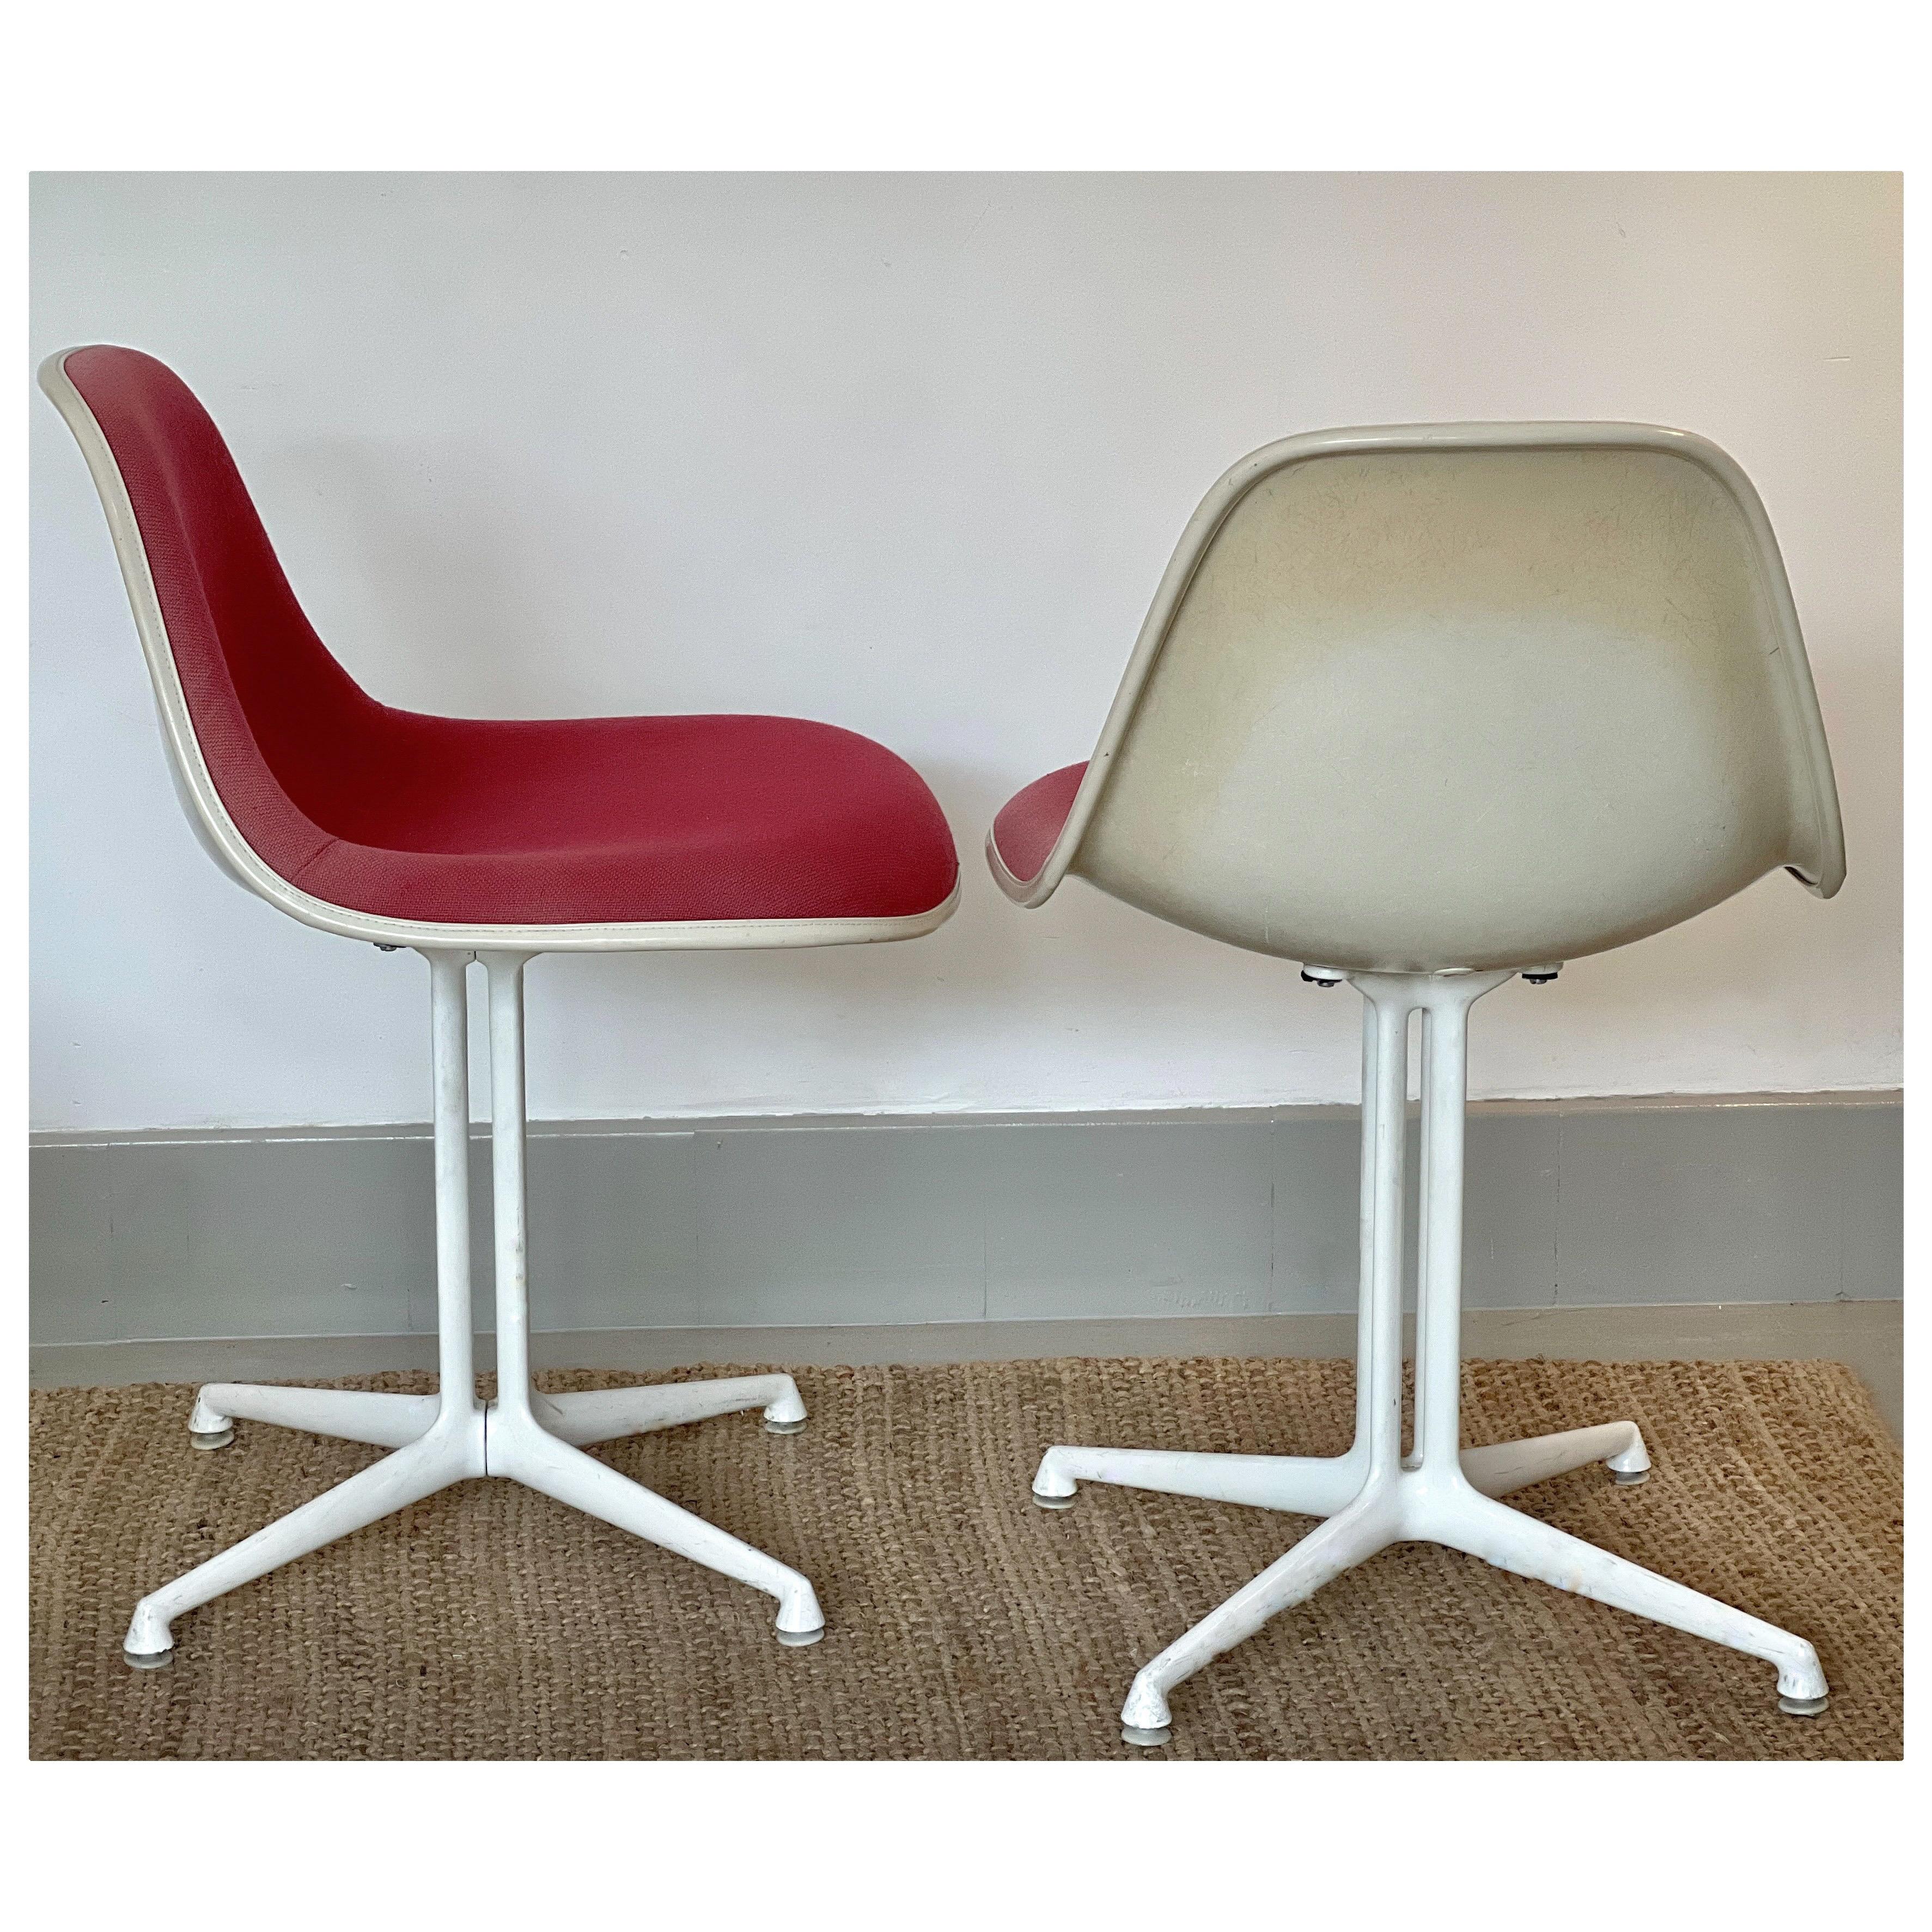 Fibreglass La Fonda Chair by Charles & Ray Eames for Vitra, 1960s For Sale 1